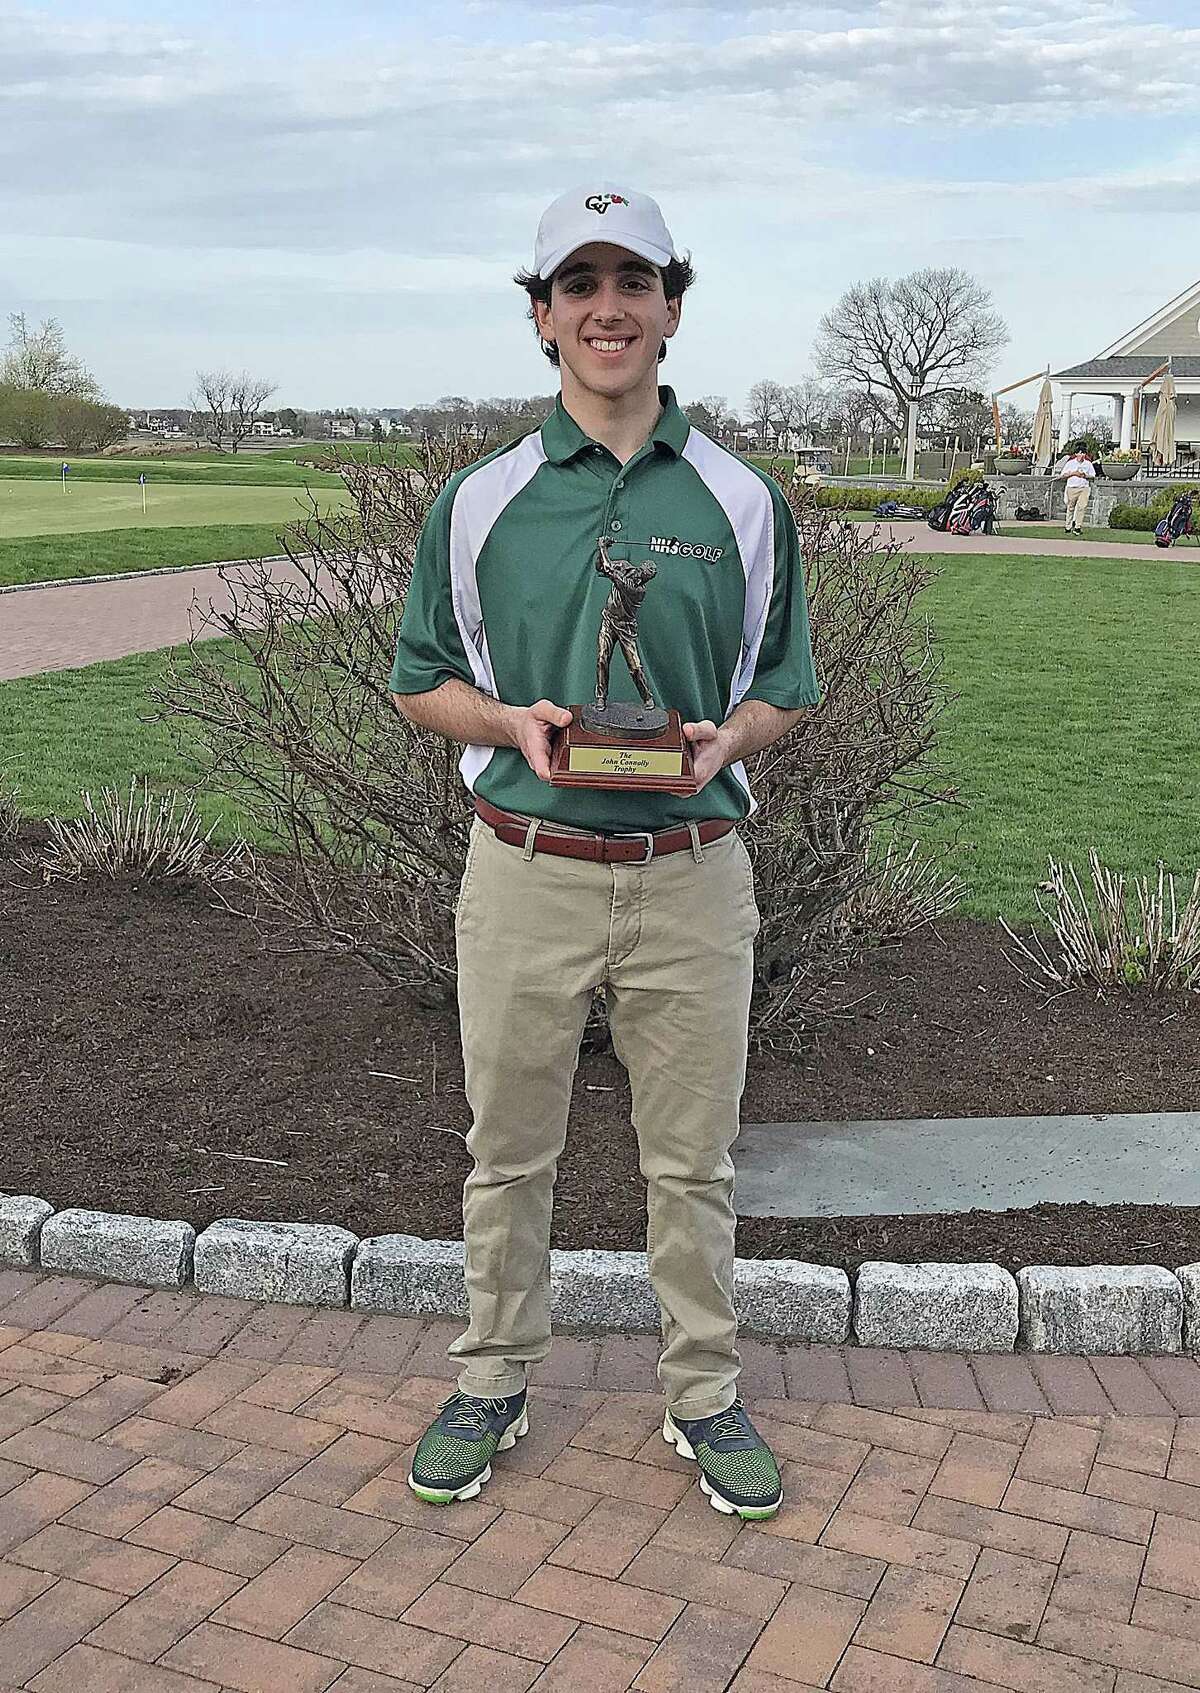 Sean Donnelly, a freshman, won the John Connolly Trophy by firing a low-match 46. Norwalk is now 2-7 while McMahon slipped to 0-6.